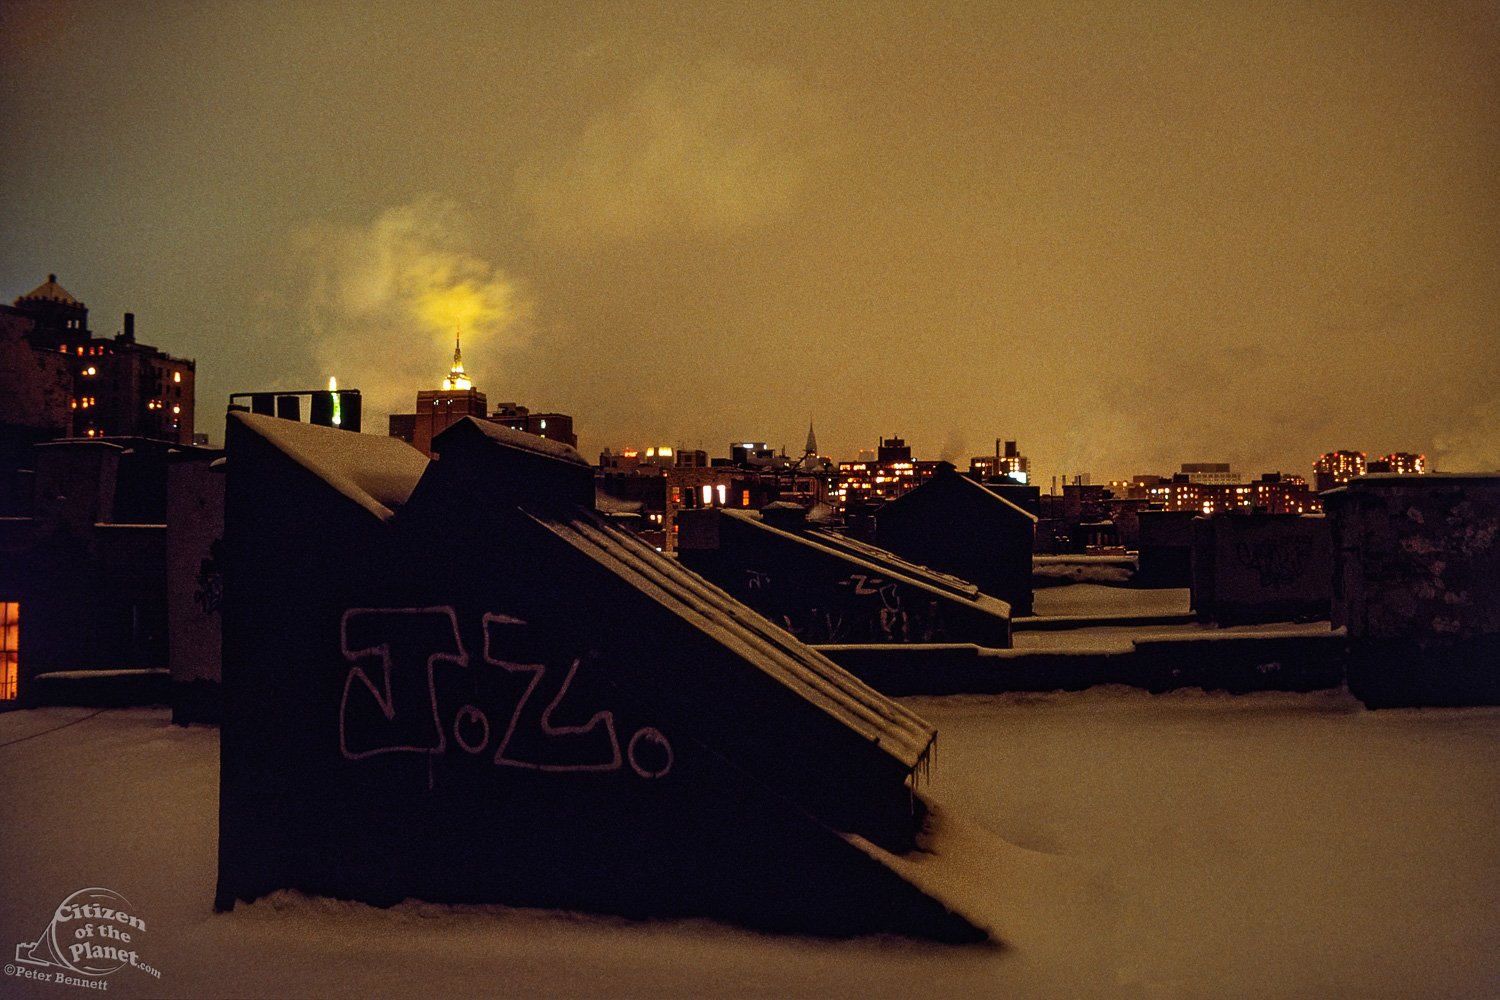  Snowy rooftop, 1st Ave 